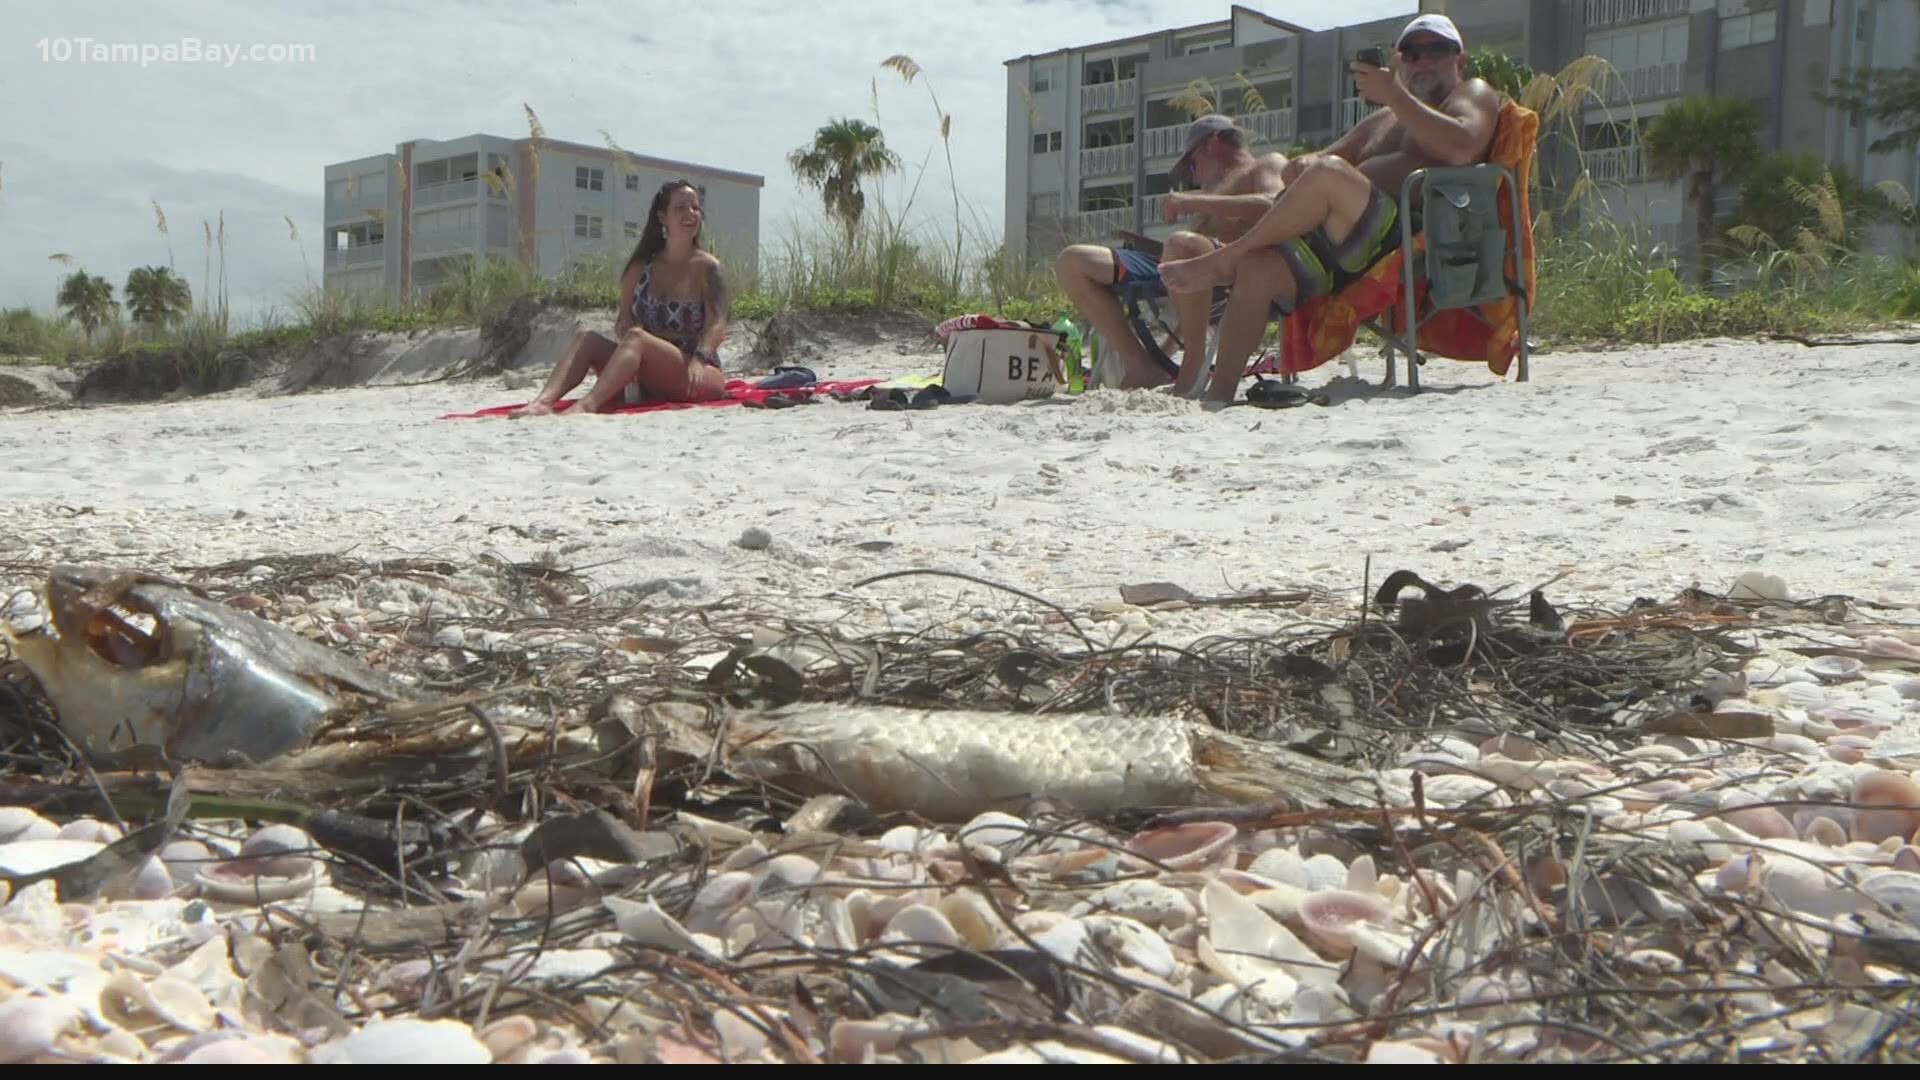 A beach hazards statement is in effect through Monday night because of red tide.